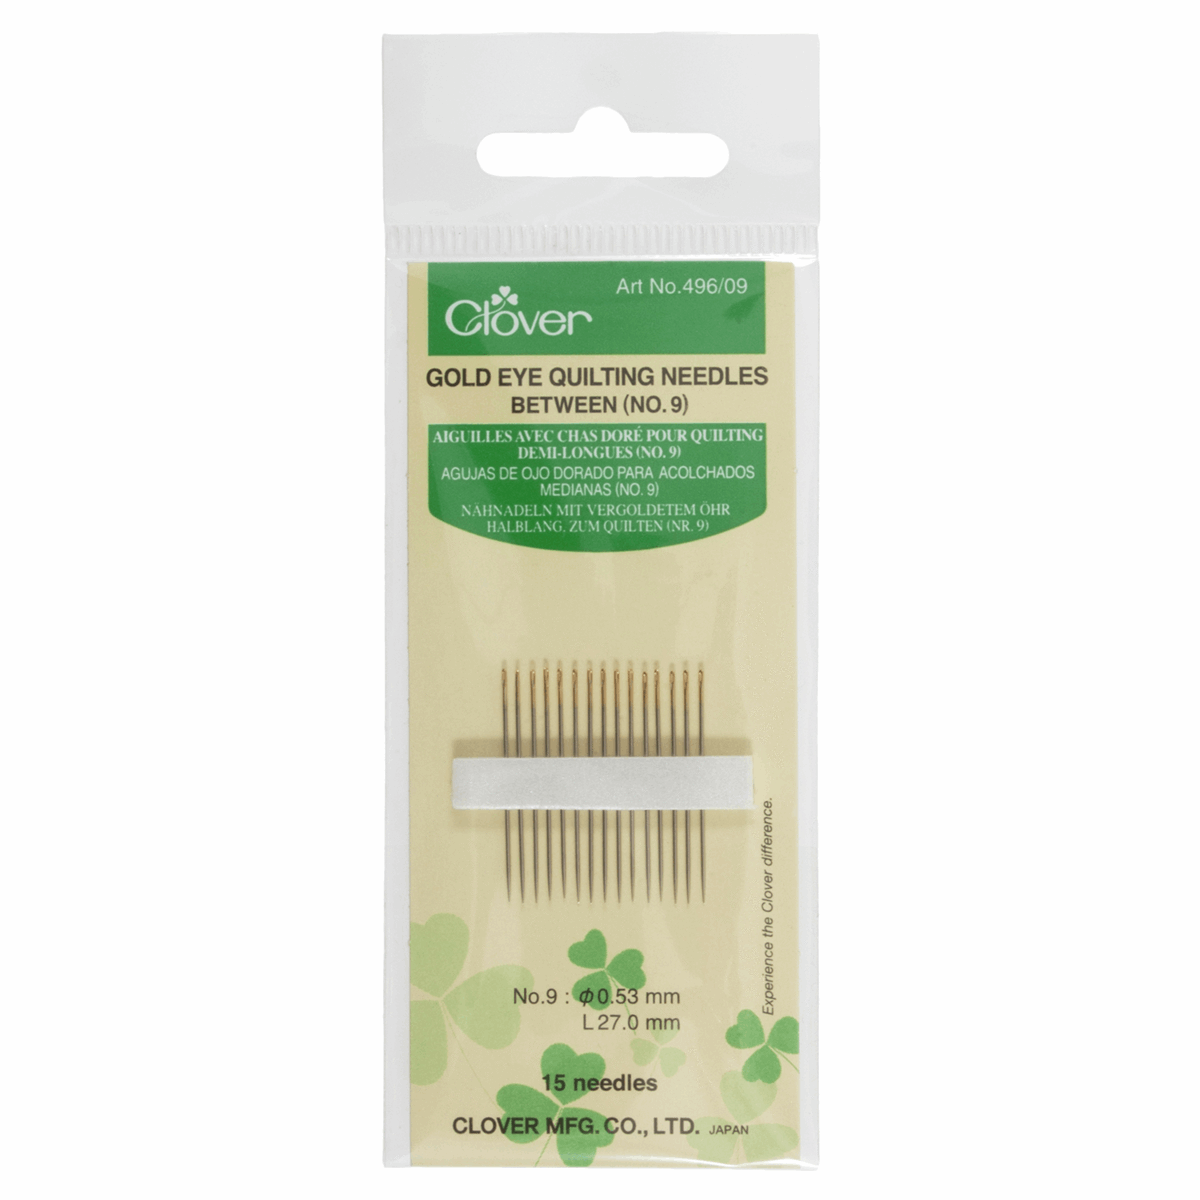 Clover Gold Eye Hand Quilting/Betweens Needles - Size No.9 (Pack of 15)